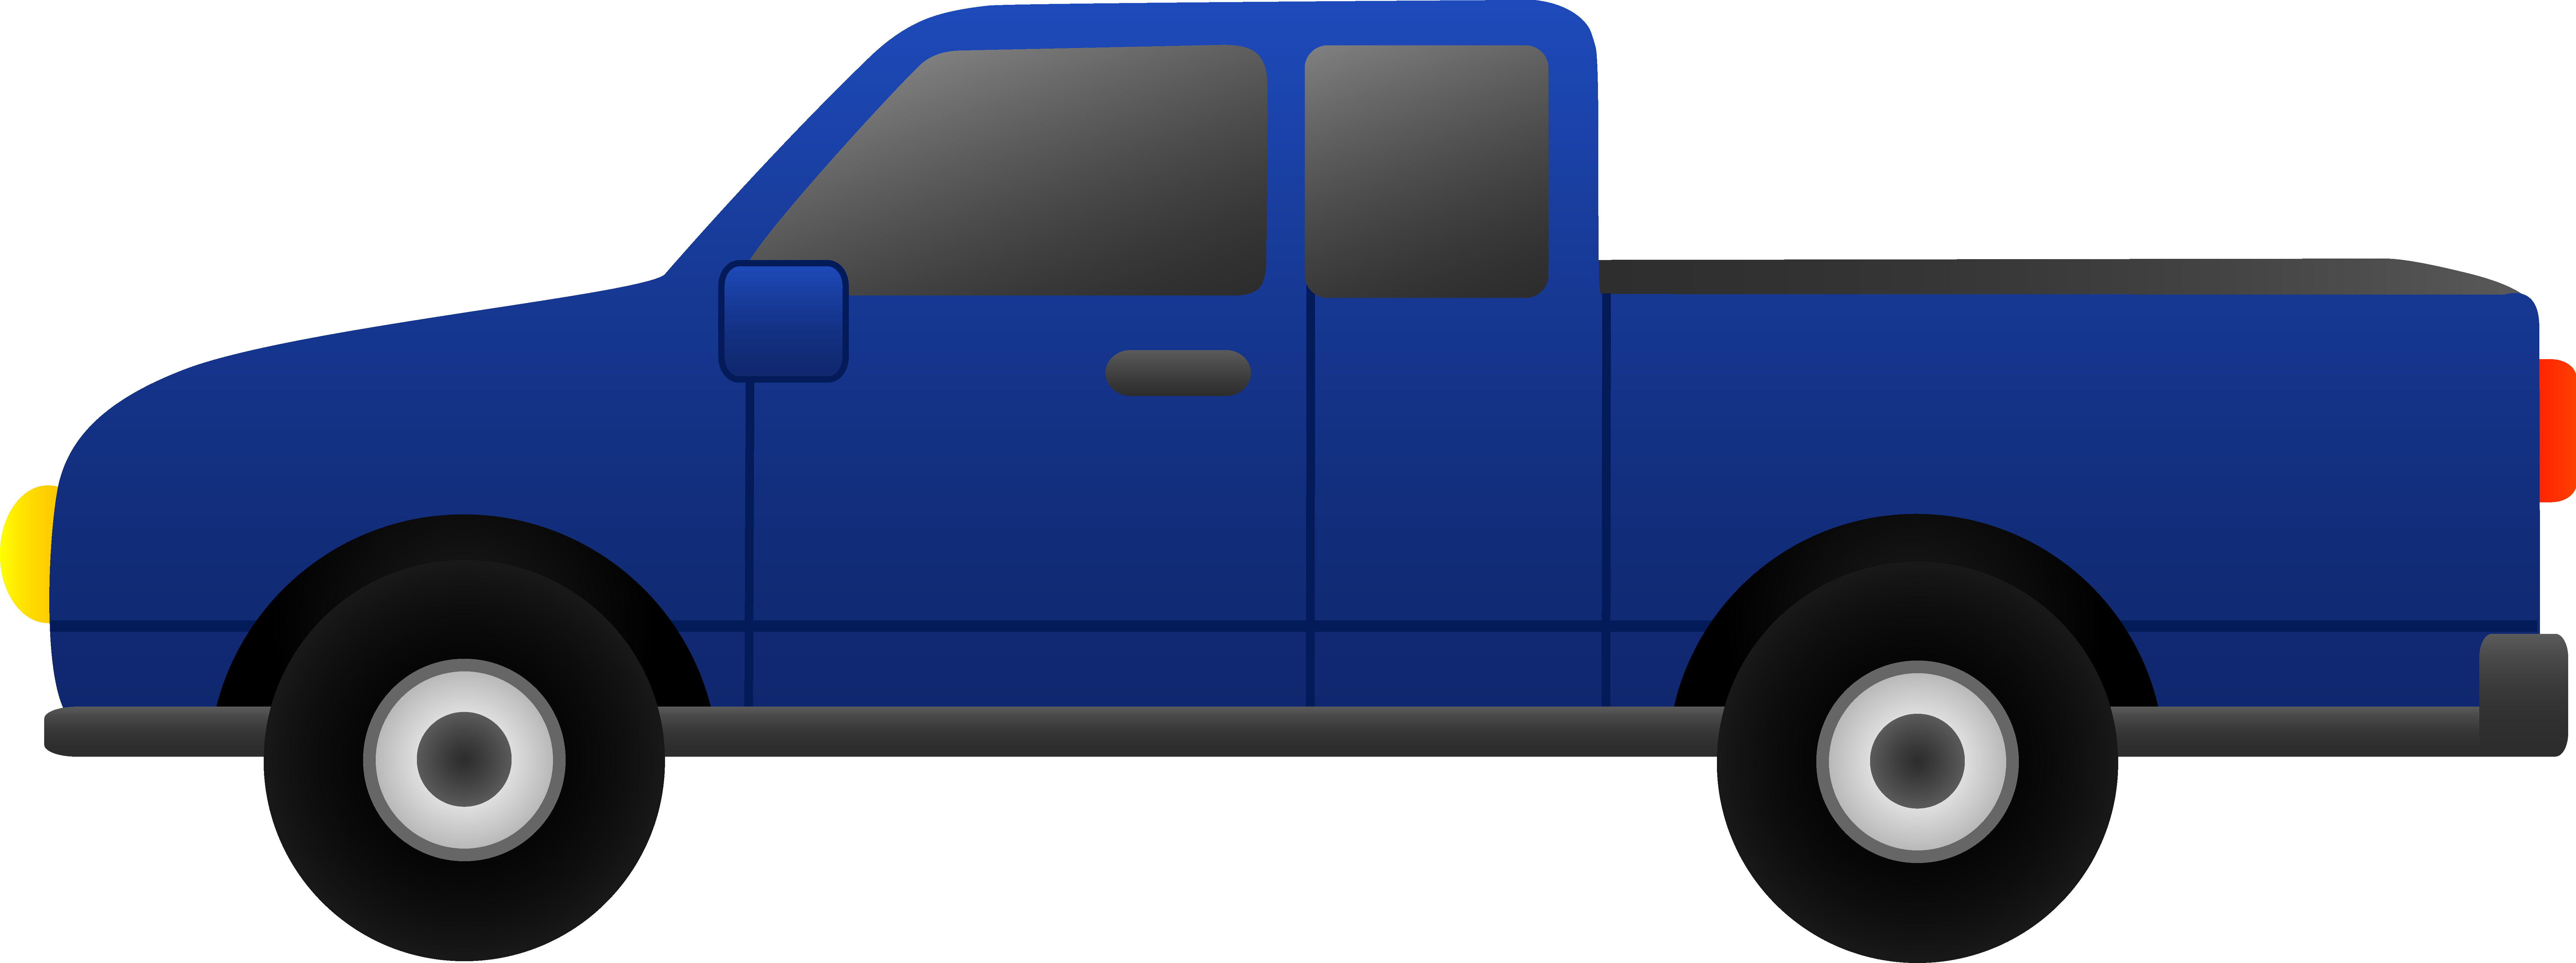 Pickup truck clipart black and white free 2